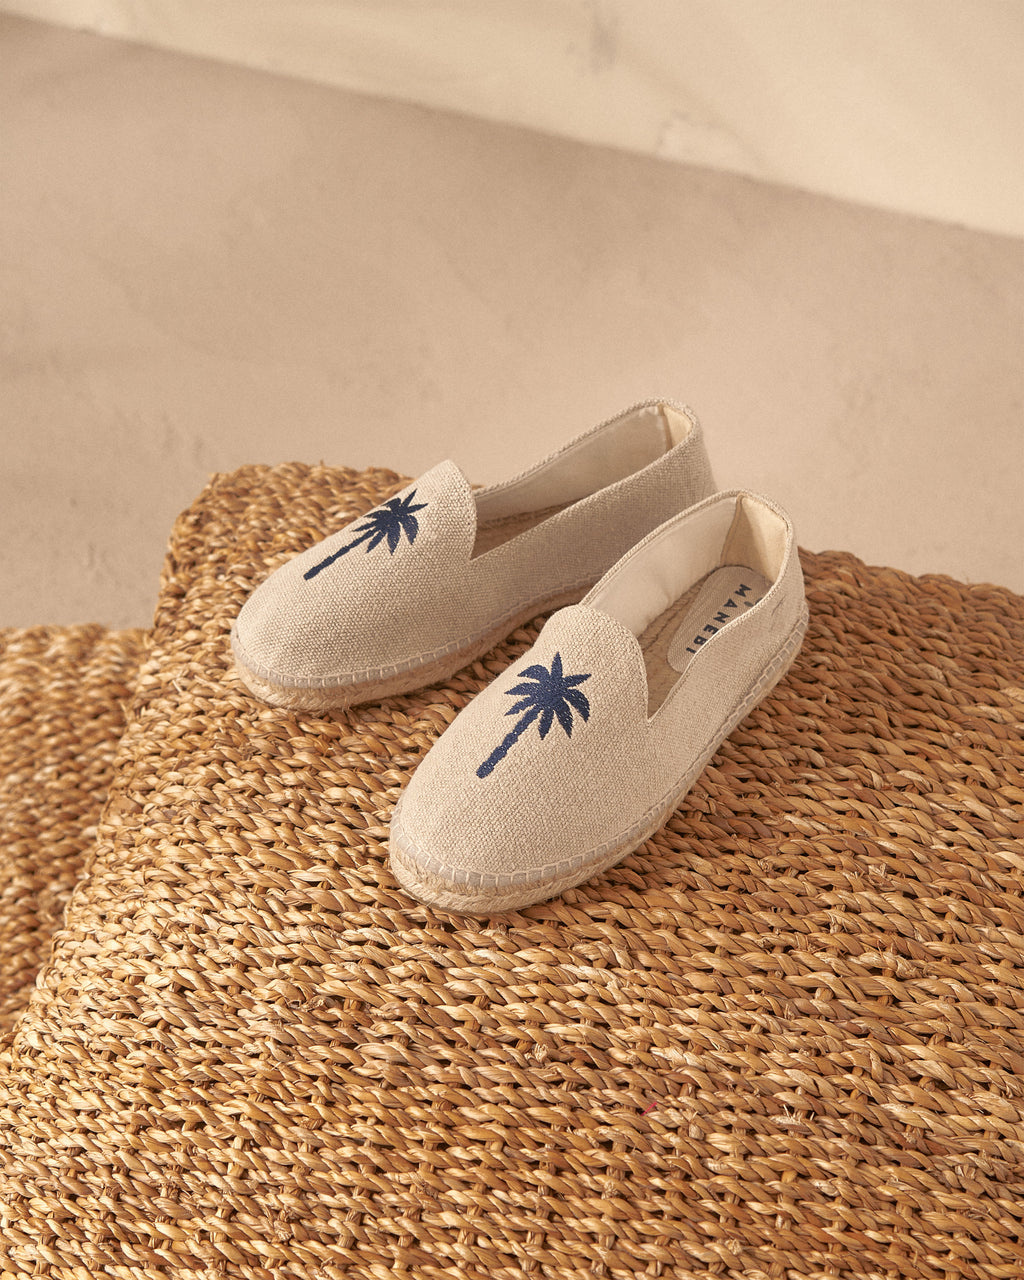 Organic Hemp With Embroidery Flat Espadrilles - Palm Springs - Natural & Navy Palm